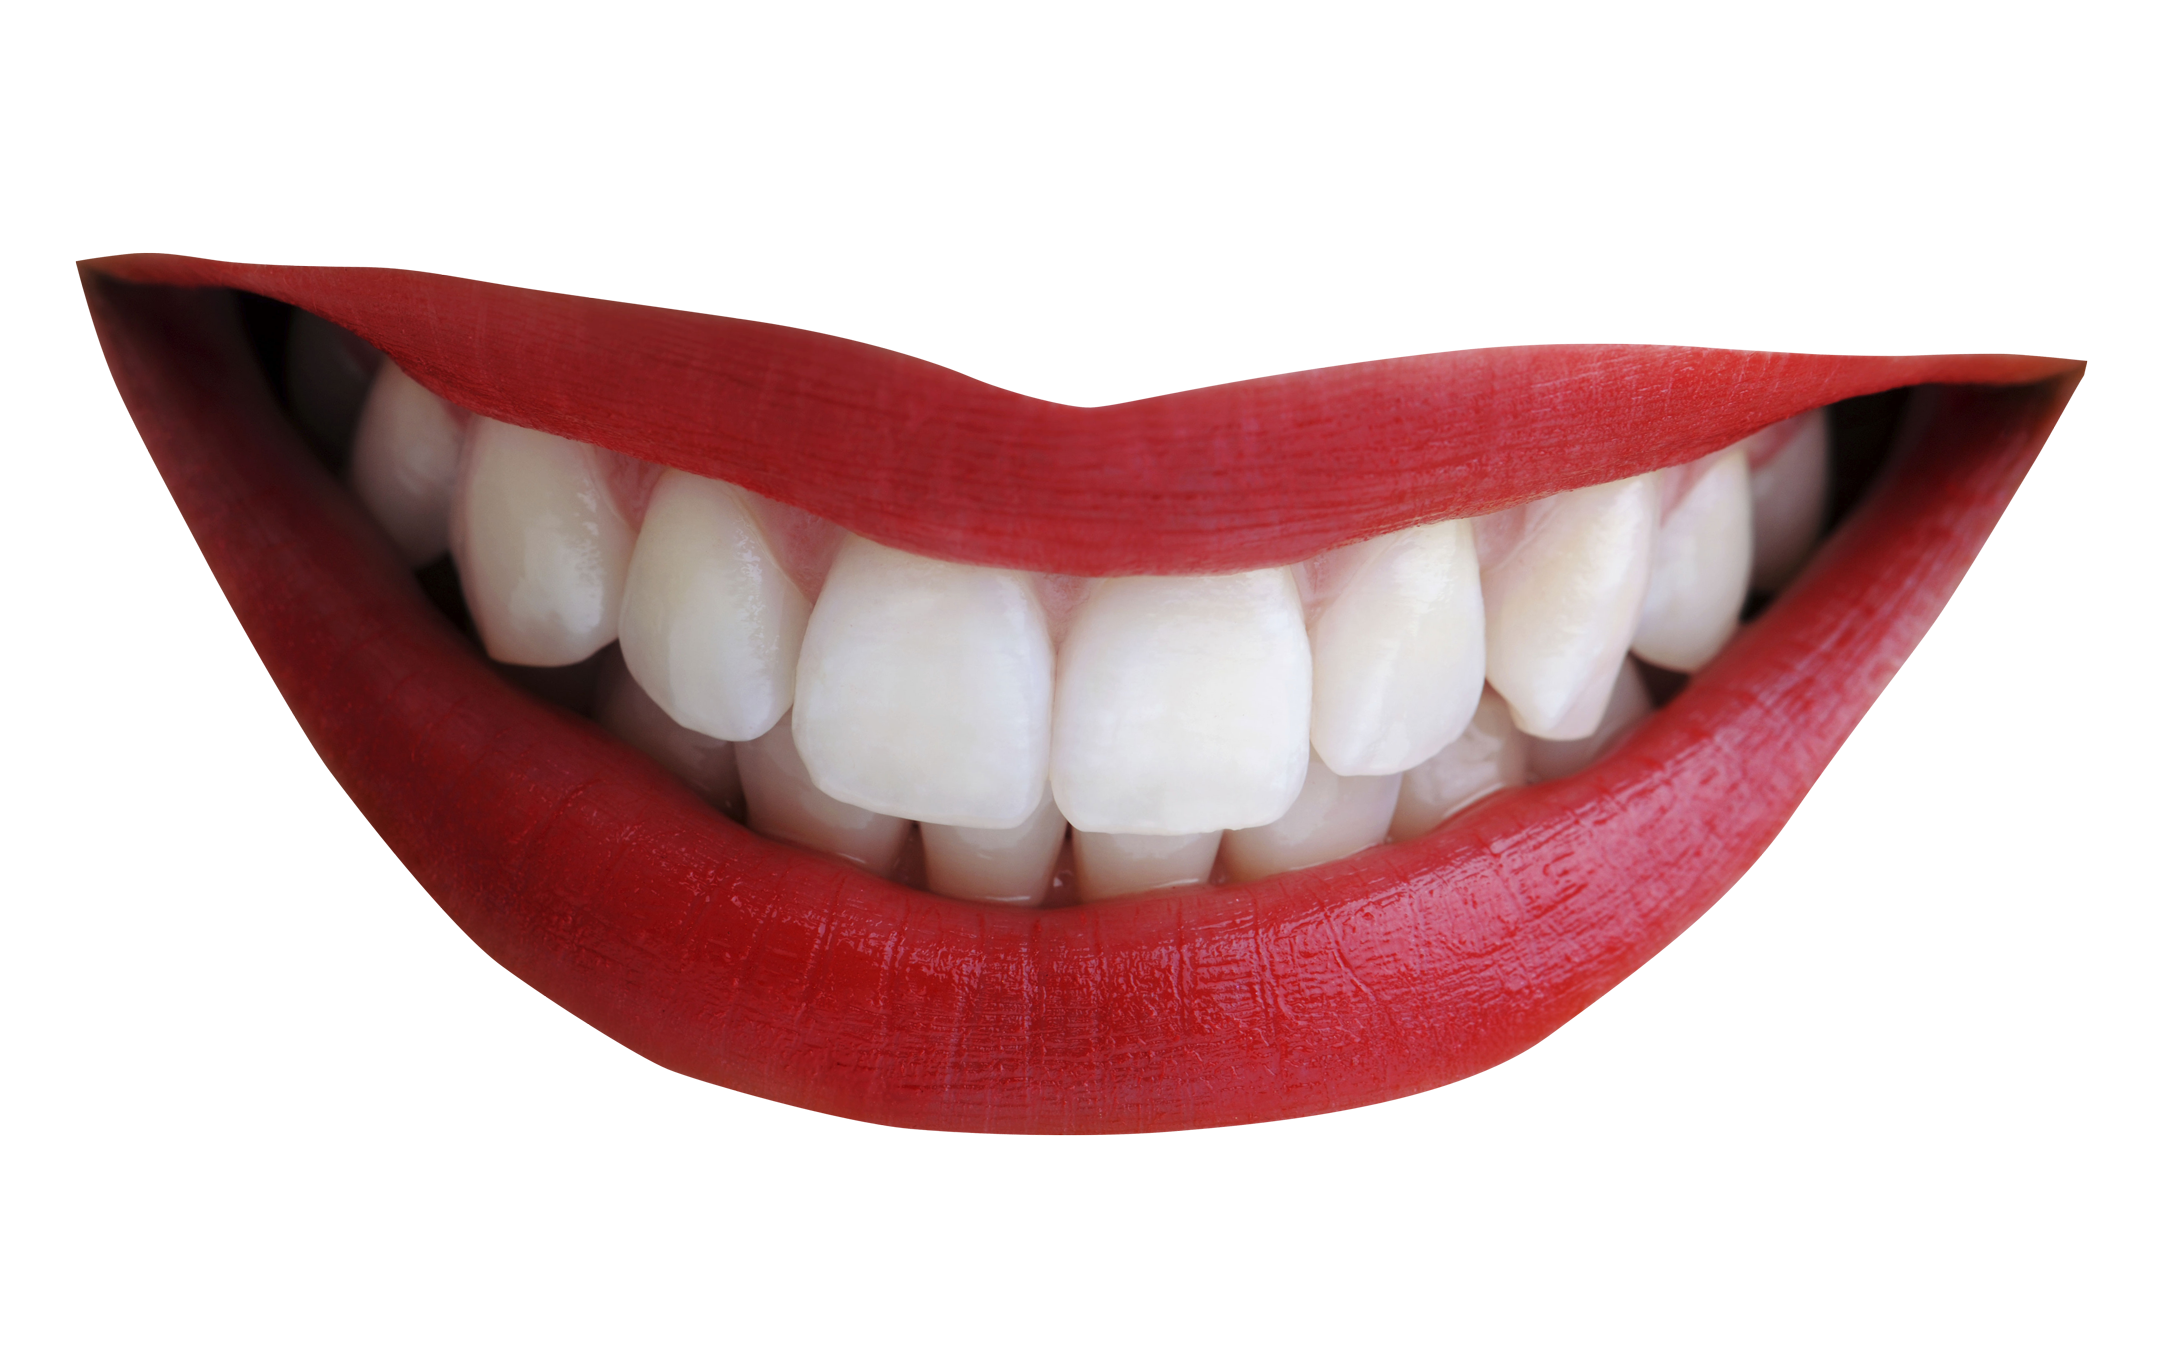 Smiling Lips PNG HD - 141174